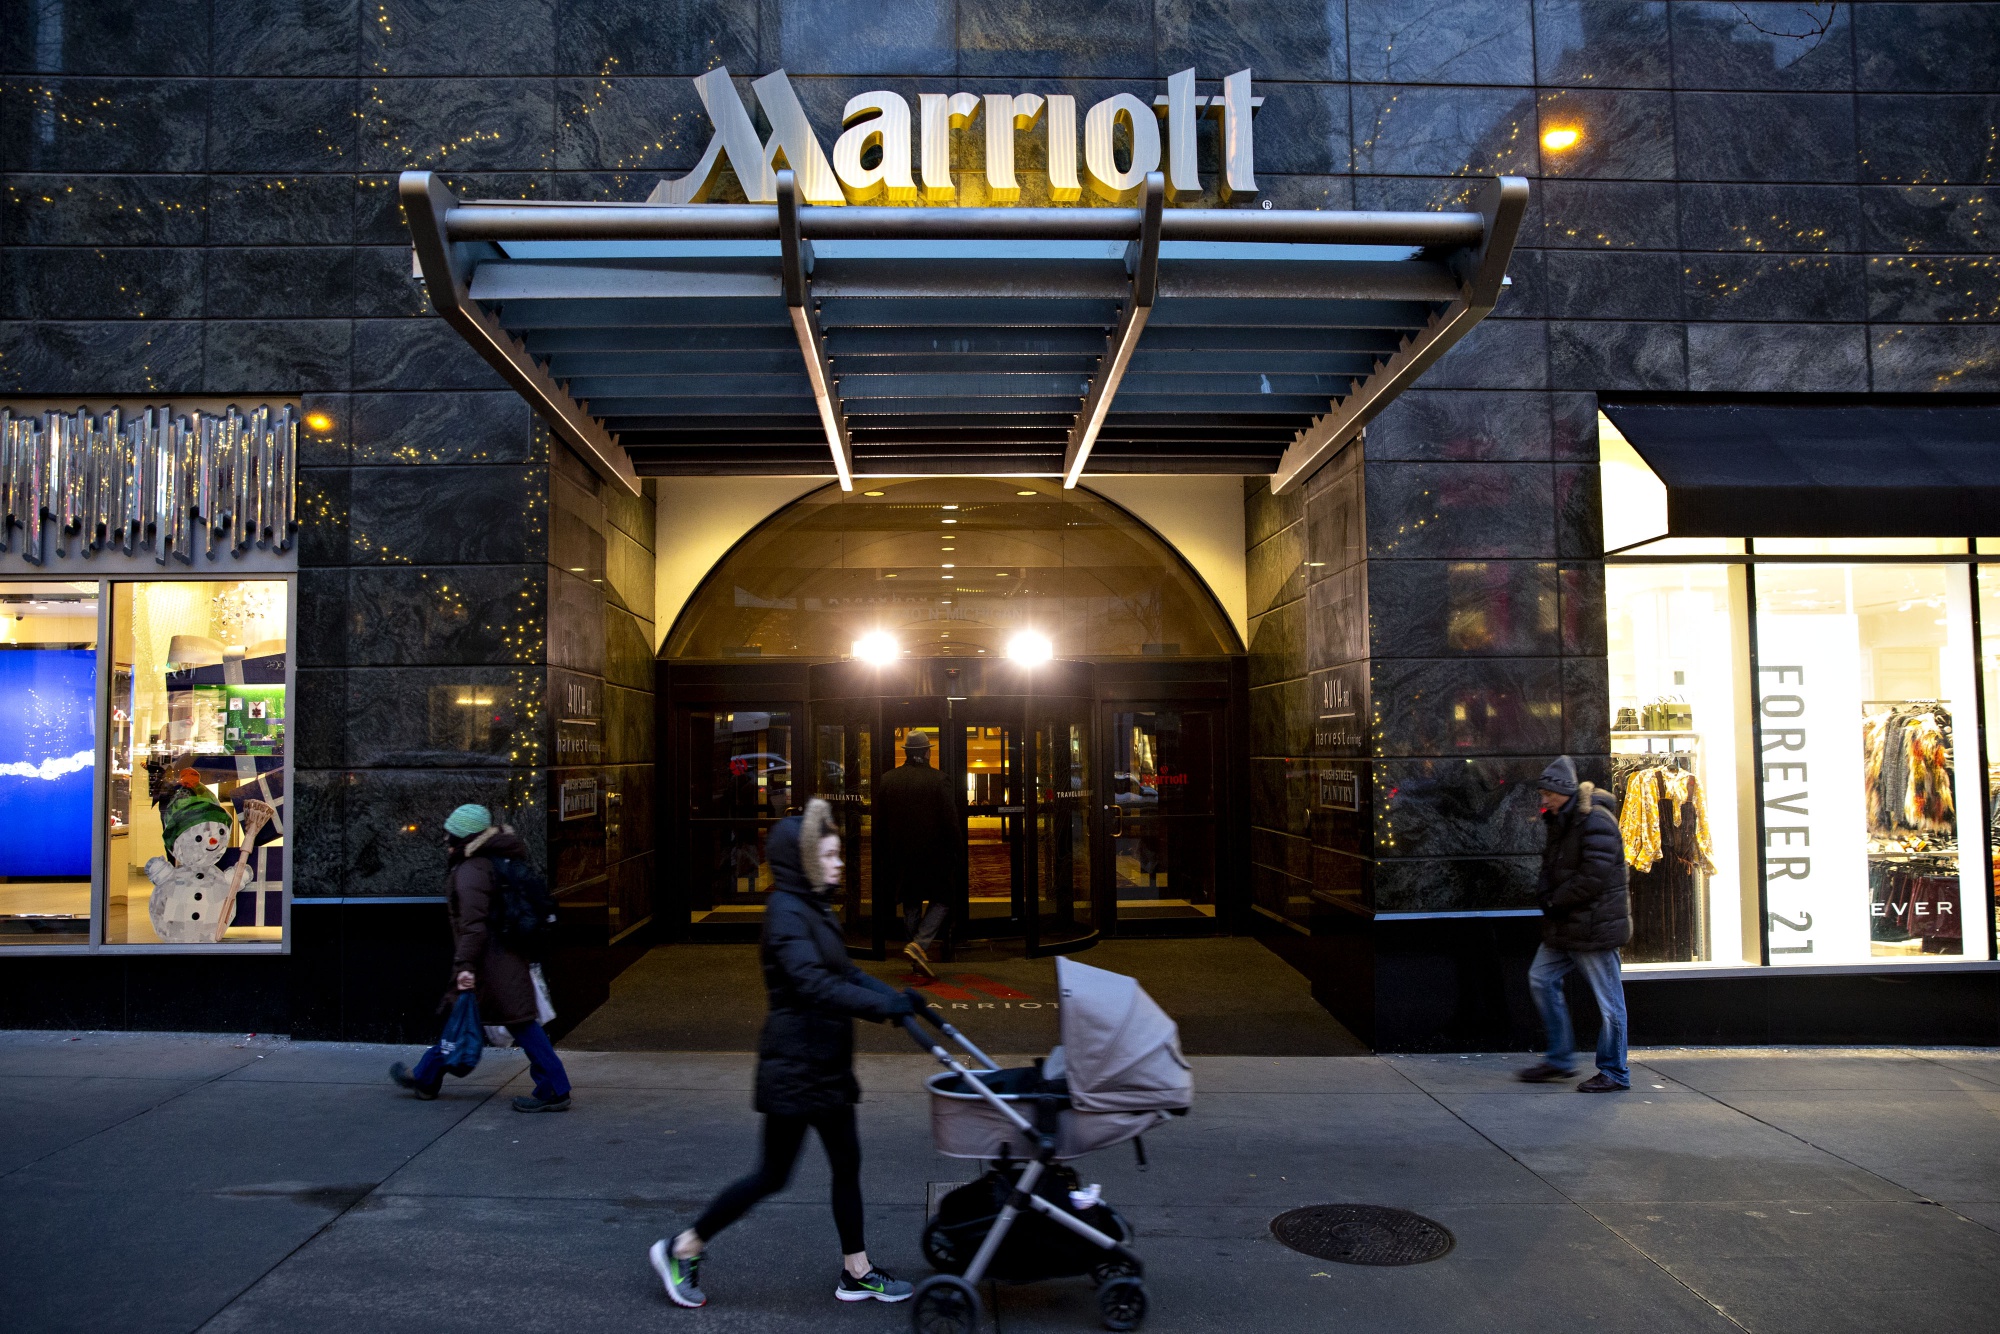 Marriott Breach Exposes Weakness in Cyber Defenses for Hotels Bloomberg